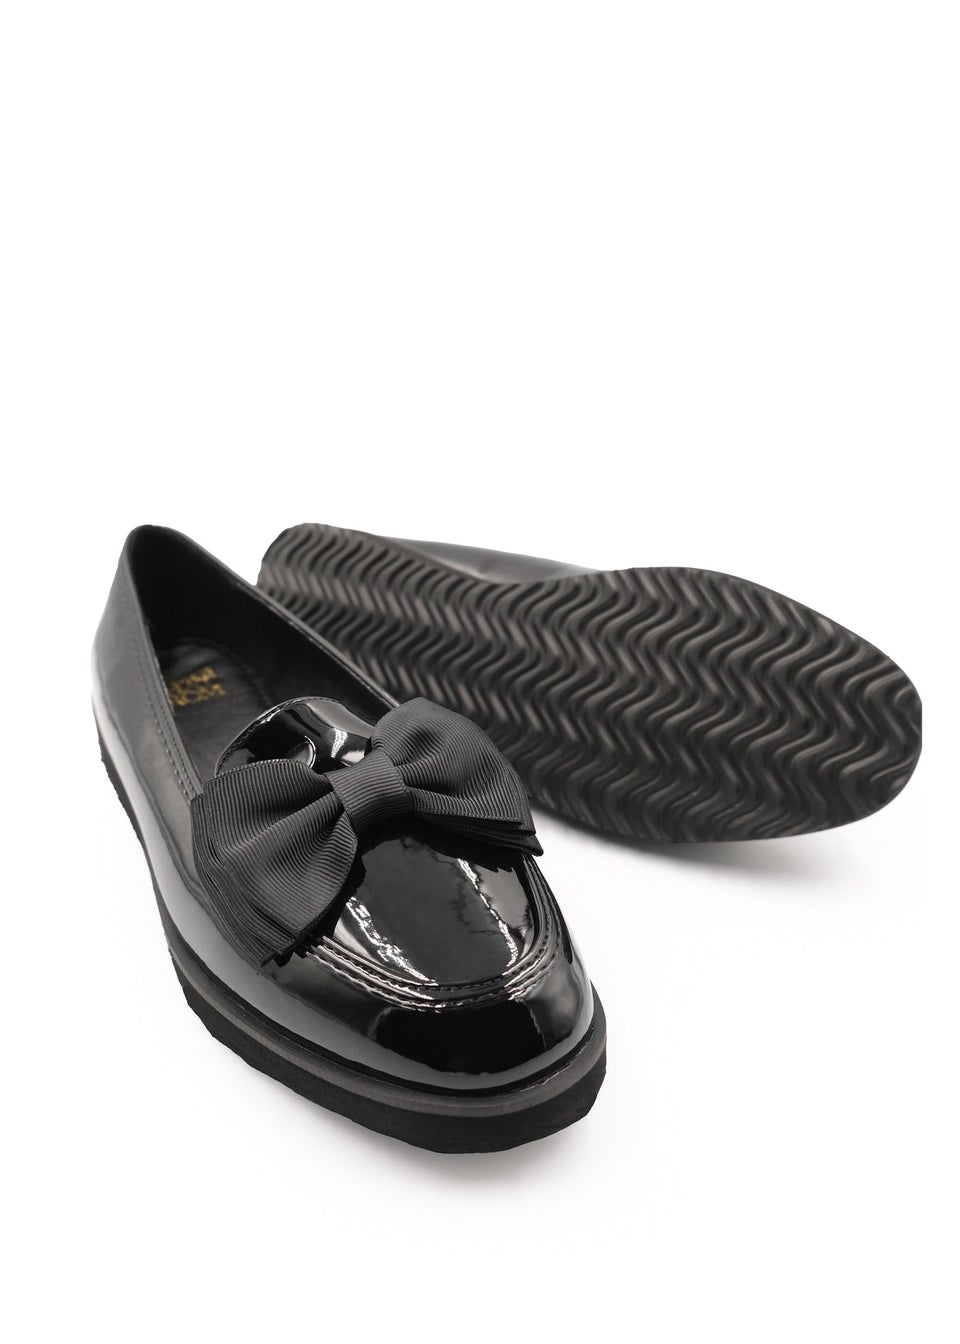 Where's That From Black Alpha Extra Wide Slip On Loafers